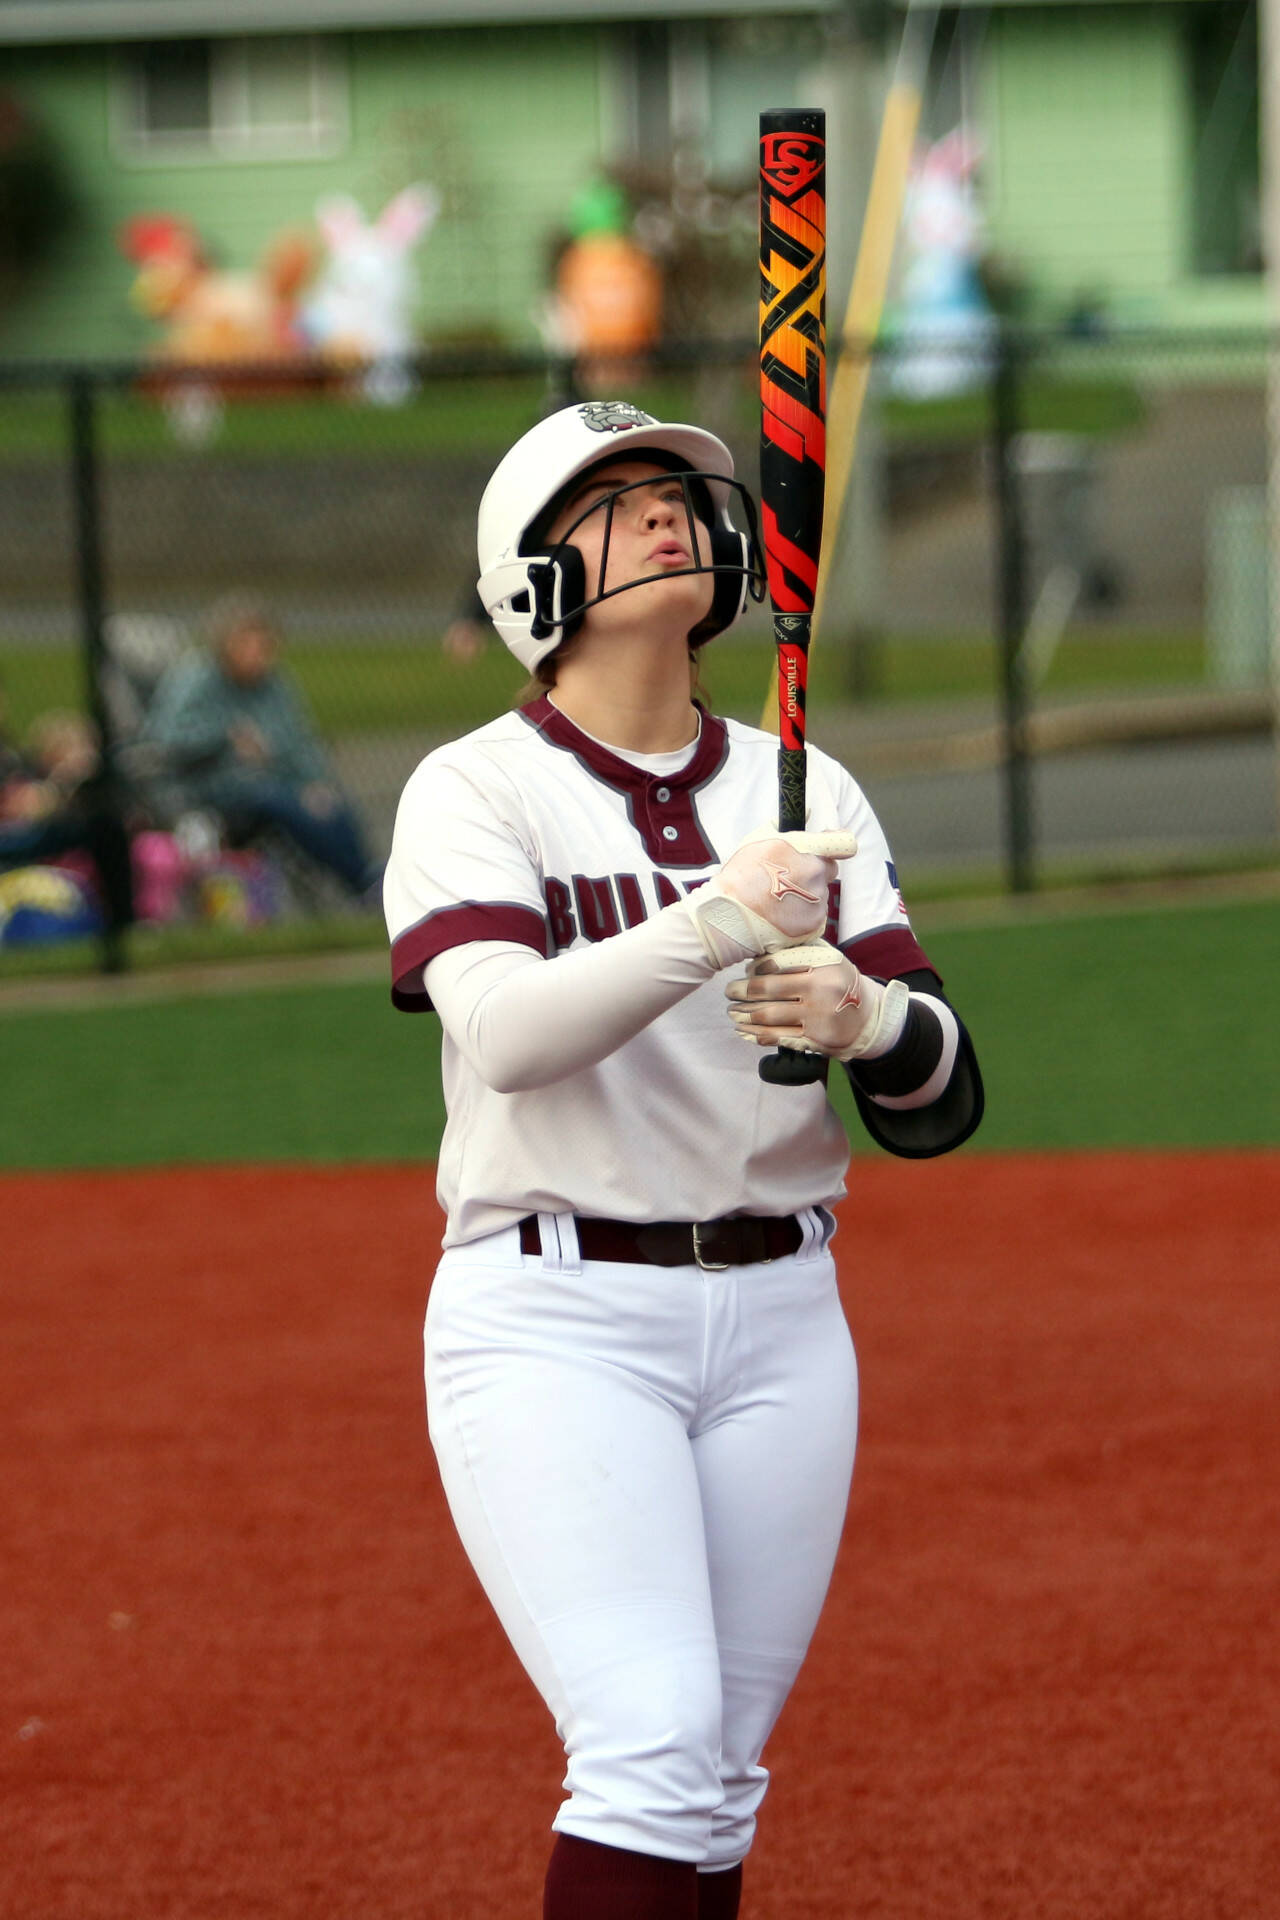 DAILY WORLD FILE PHOTO Montesano’s Ali Parkin, seen here in a file photo from March 8, had three hits to lead the Bulldogs to an 8-4 win over Forks on Thursday in Forks.